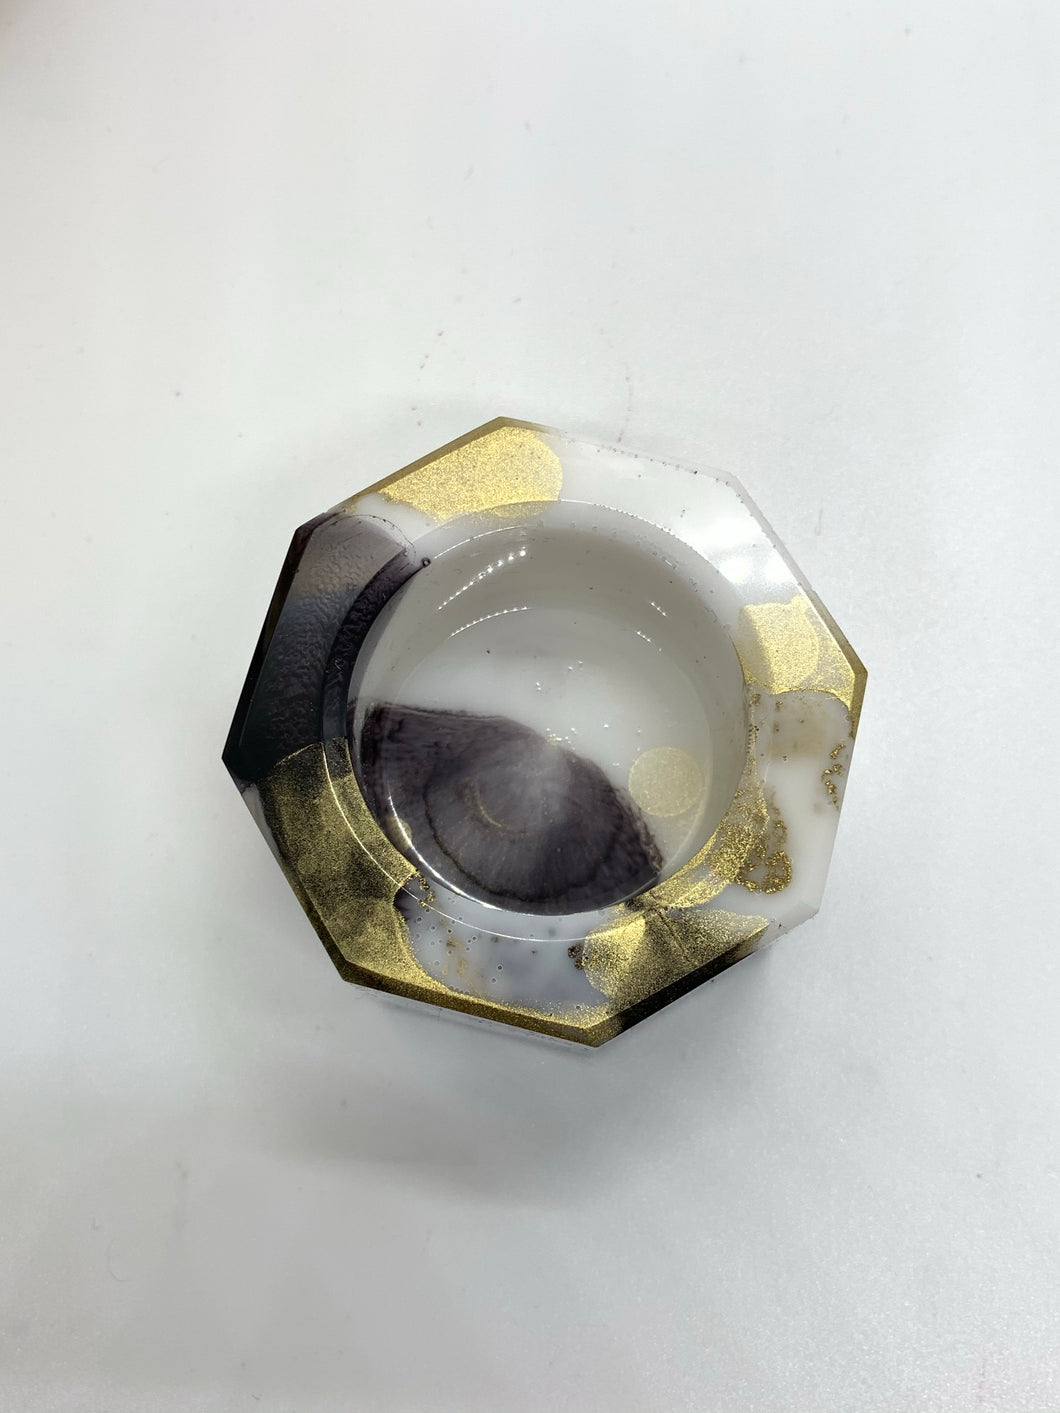 Black White and Gold Crystal Ring  Dish